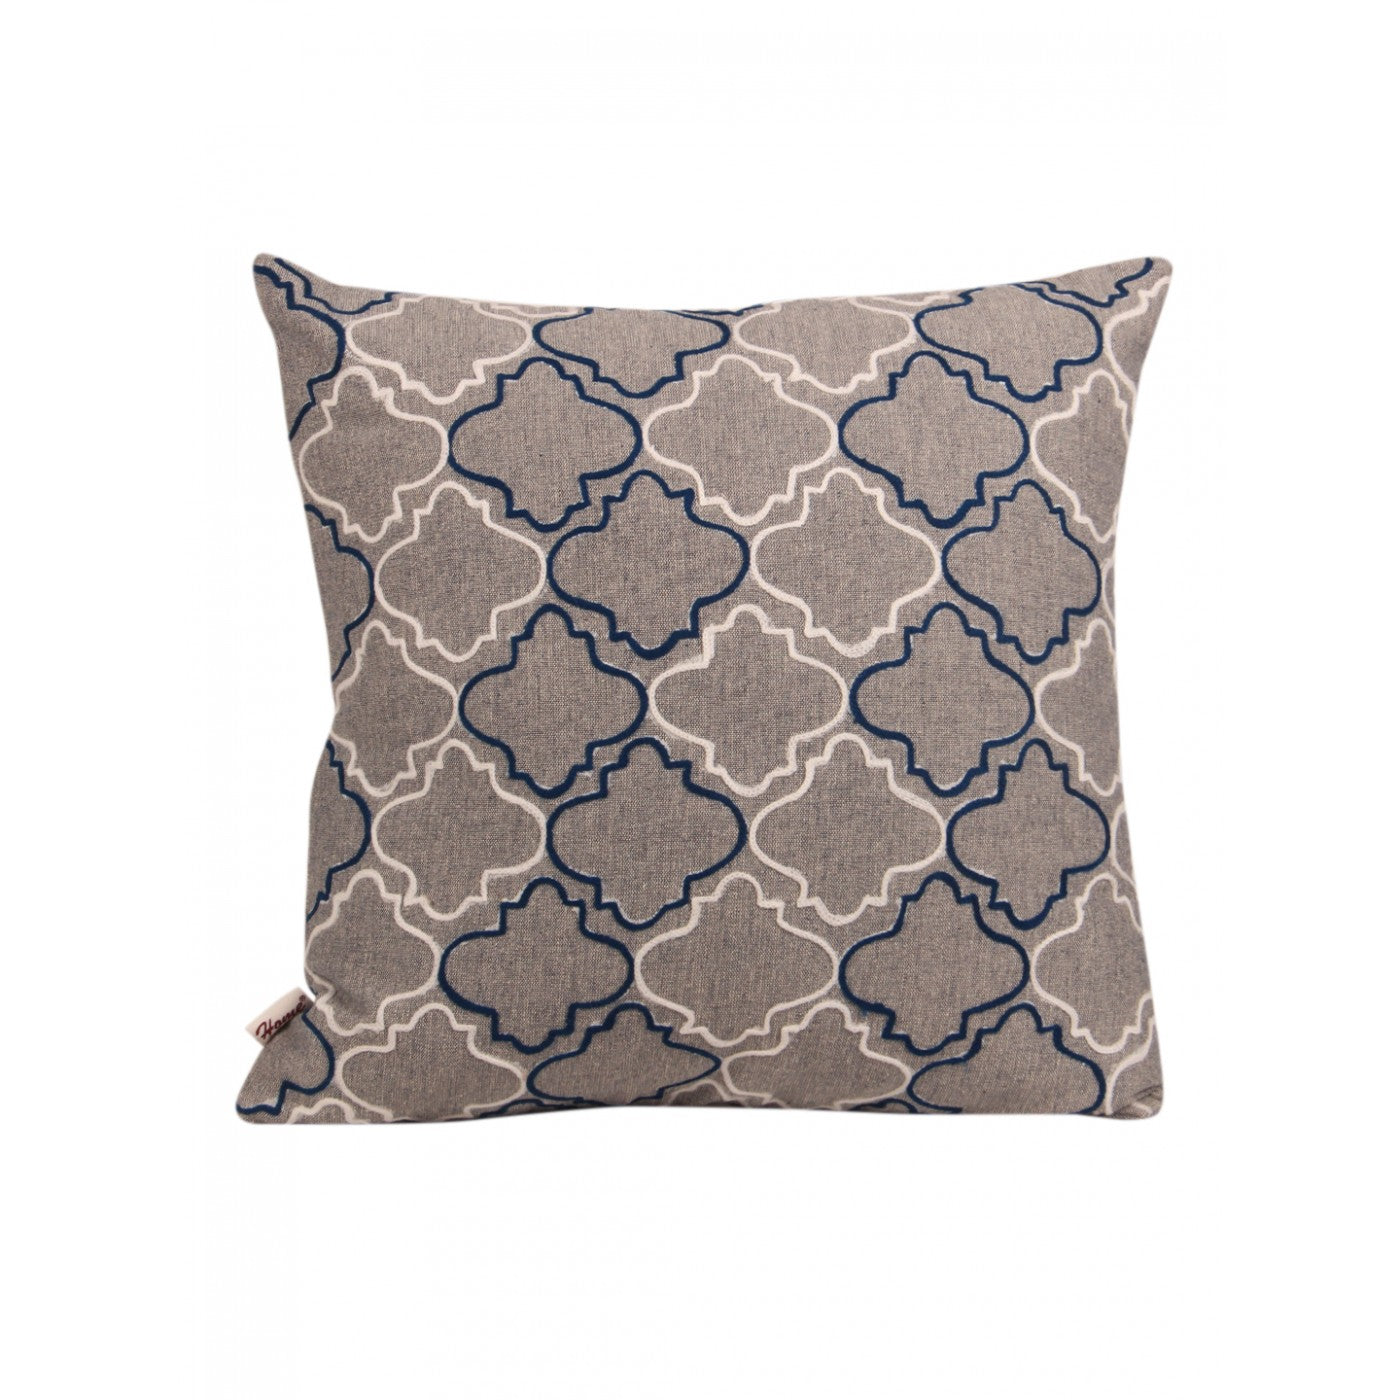 Timeless Threads 16x16 Inch Cotton Cushion Cover with Aari Embroidery